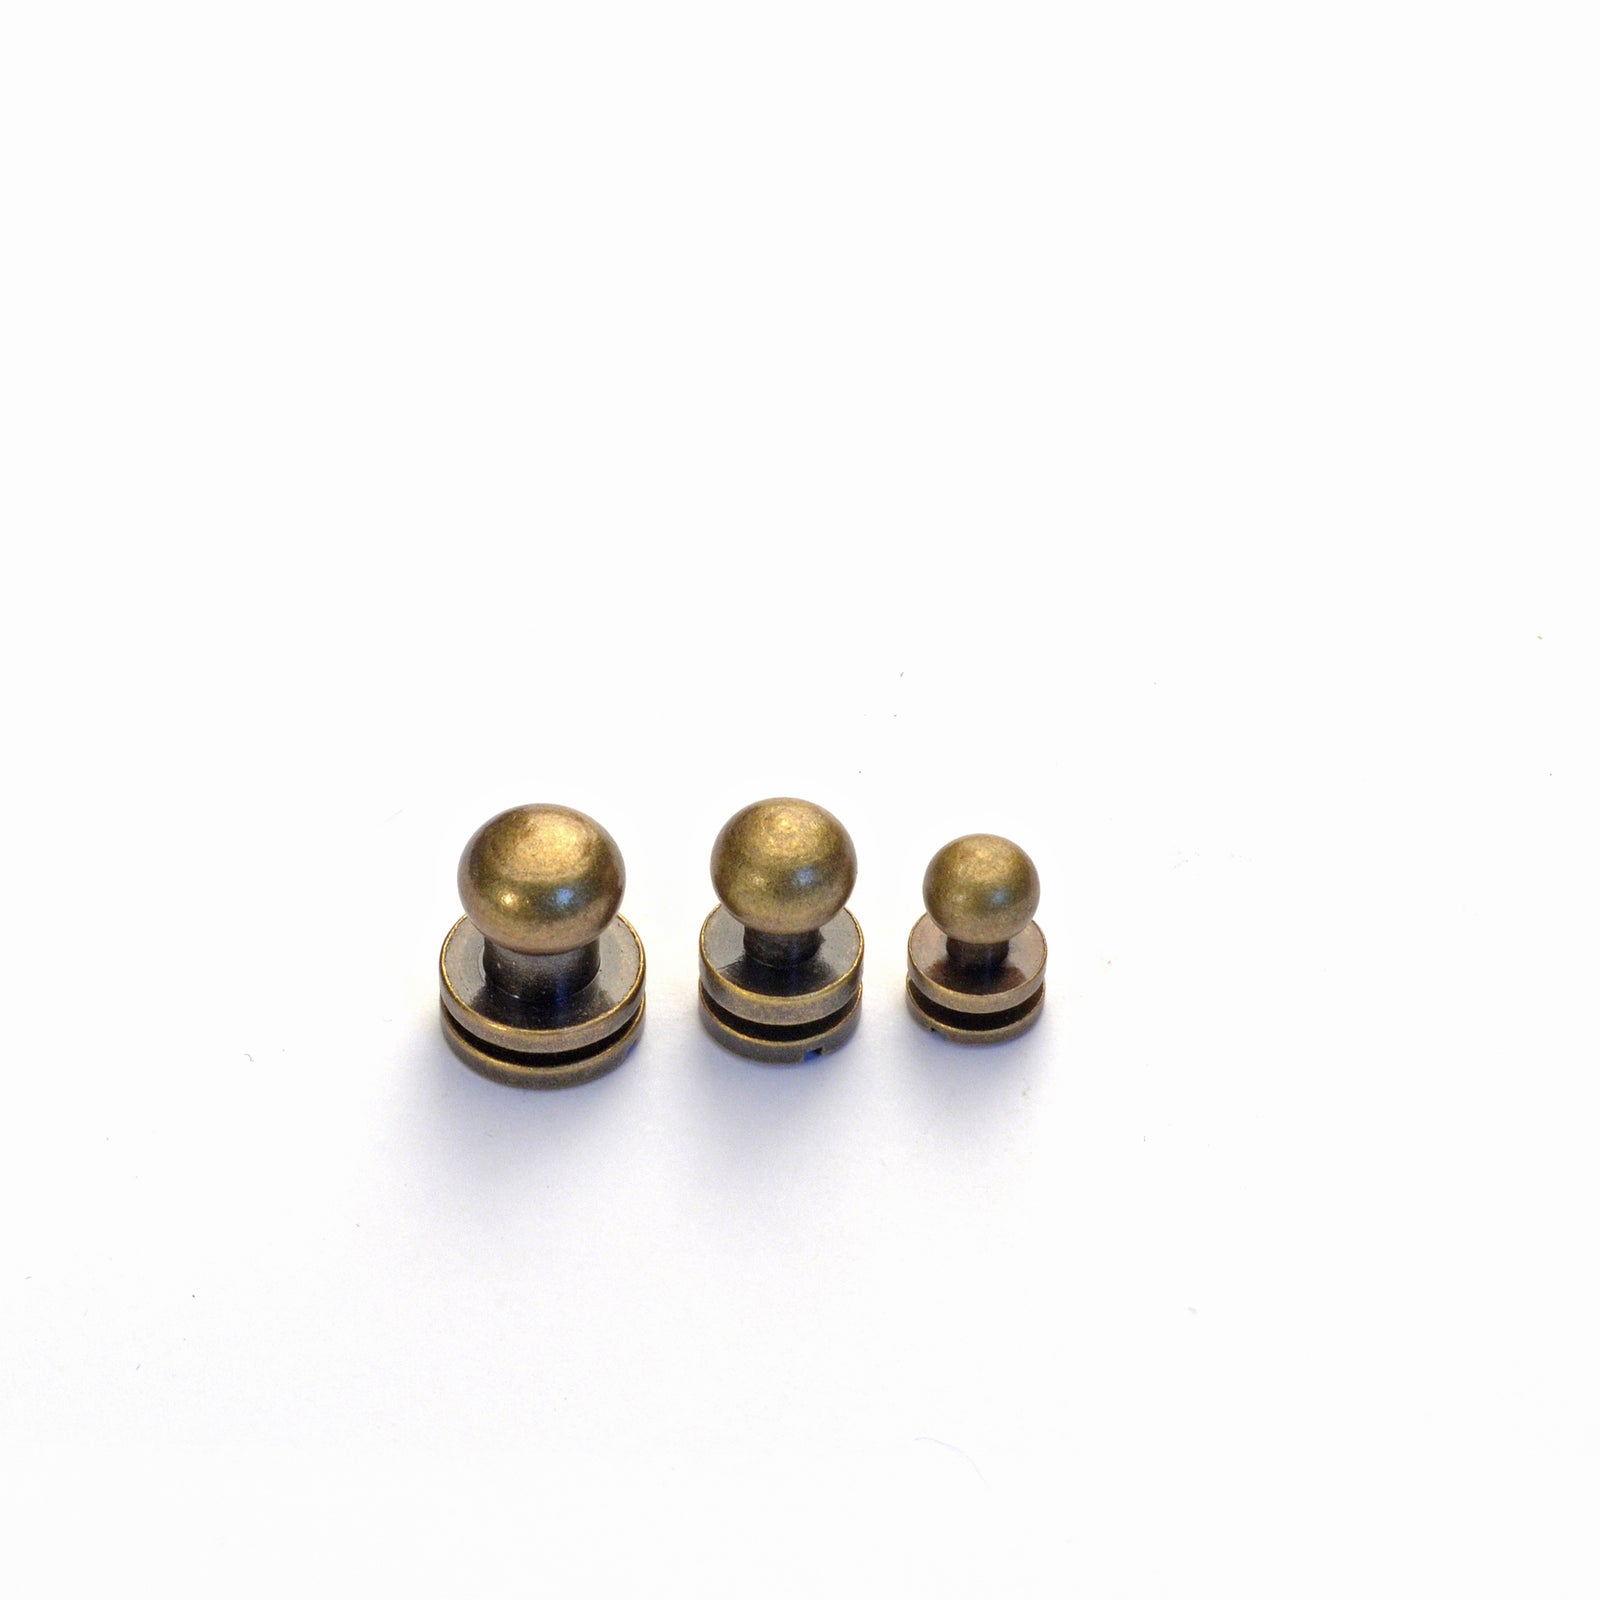 9mm, Antique Brass, Round Top Collar Button Stud with Screw, Solid Bra –  Weaver Leather Supply